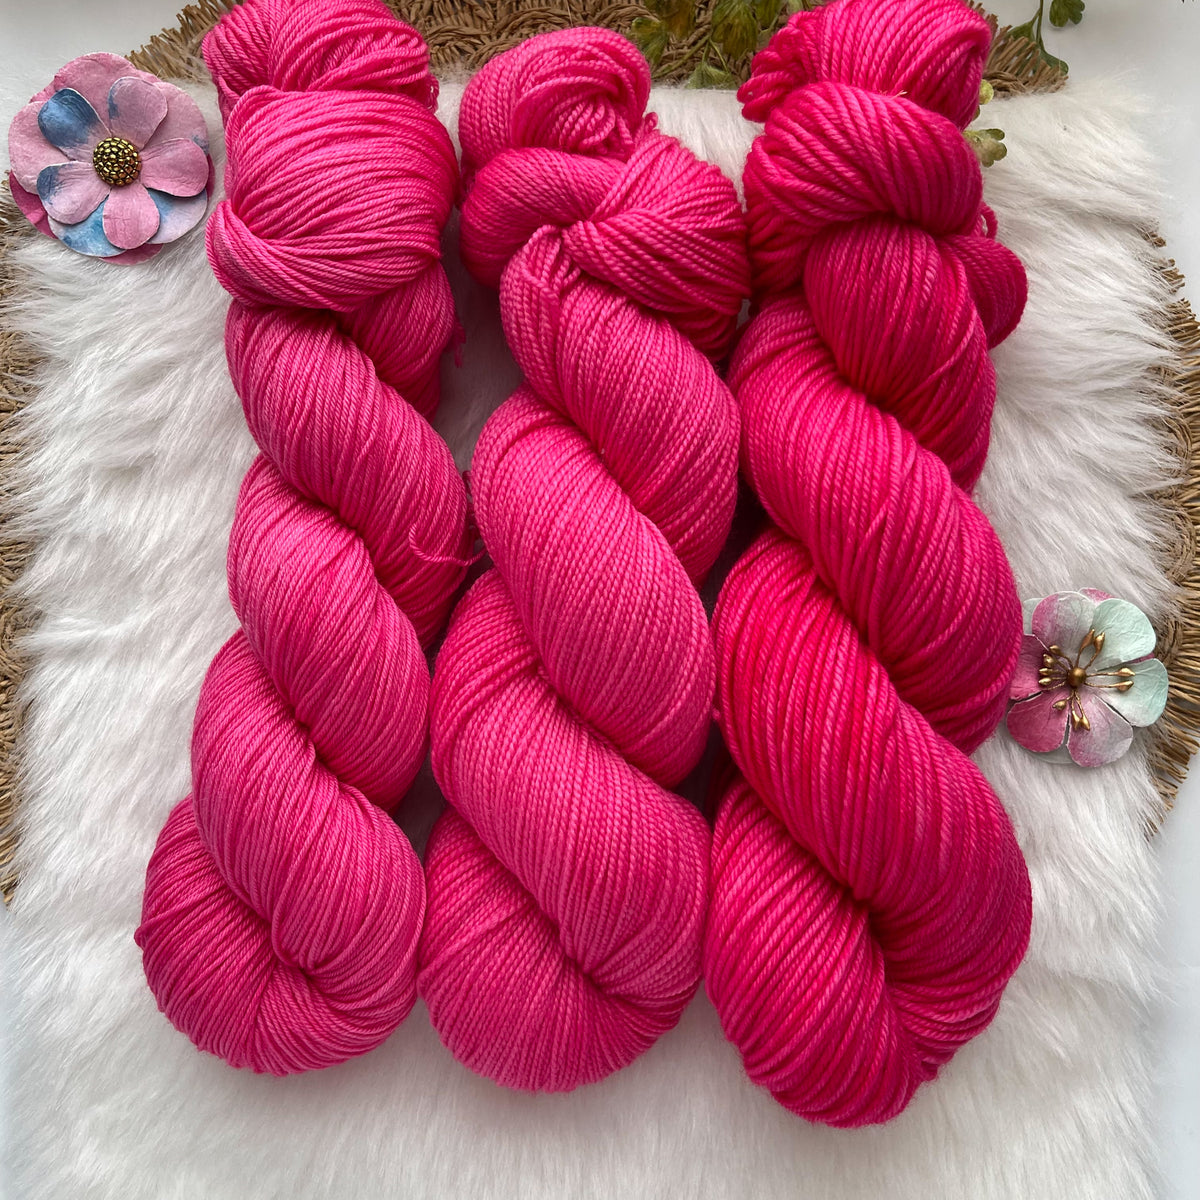 ROSABELLA - Dyed to Order - Hand Dyed Yarn Skein